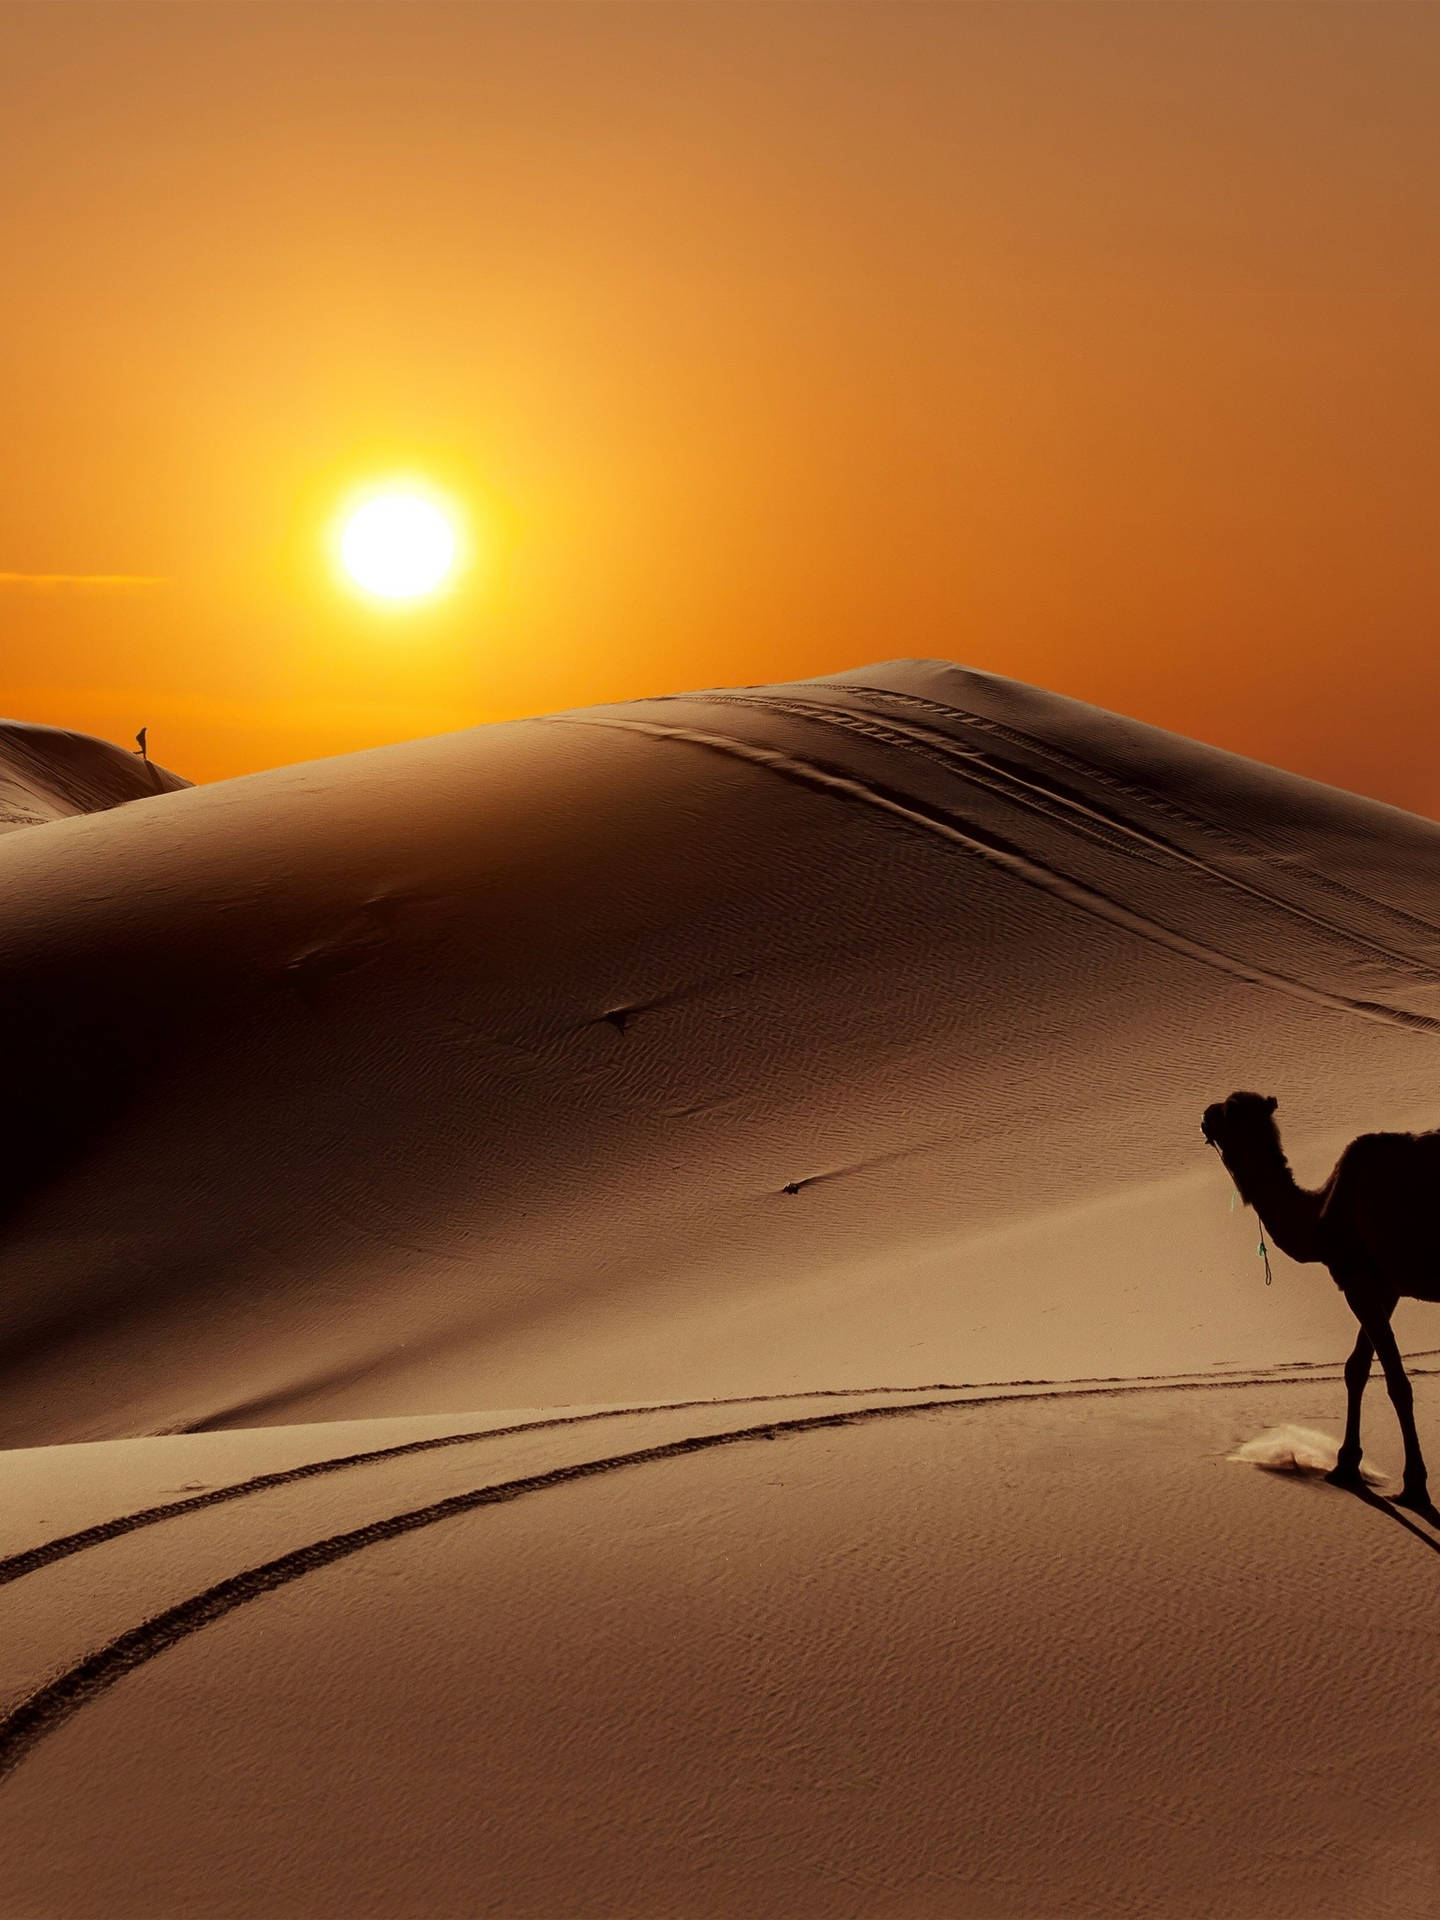 Camel In Desert With Sunset Background